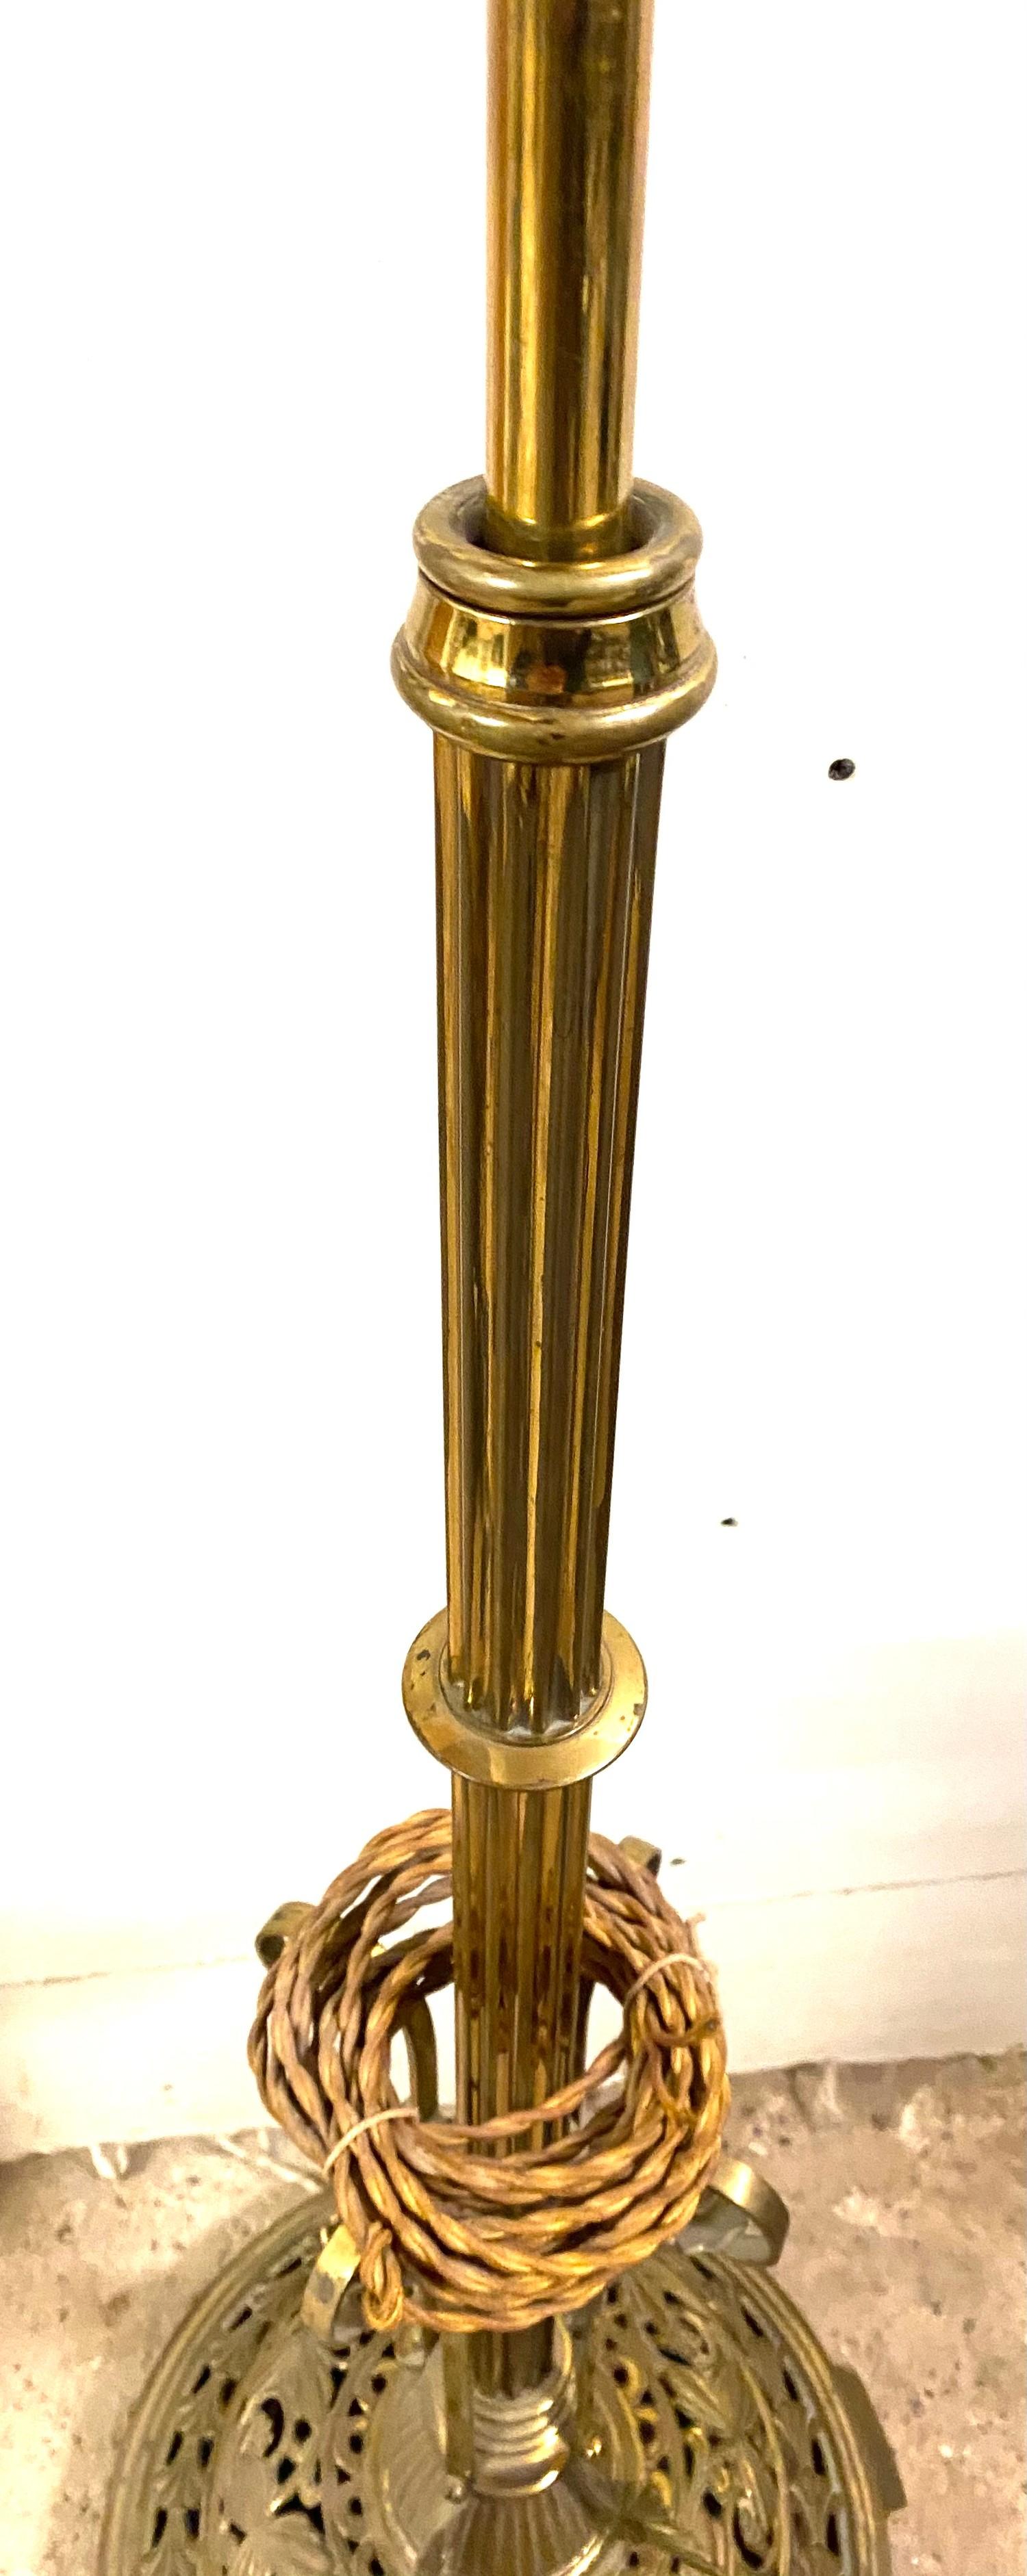 Victorian ornate telescopic oil lamp converted to electric, untested, some damage please view images - Image 8 of 9